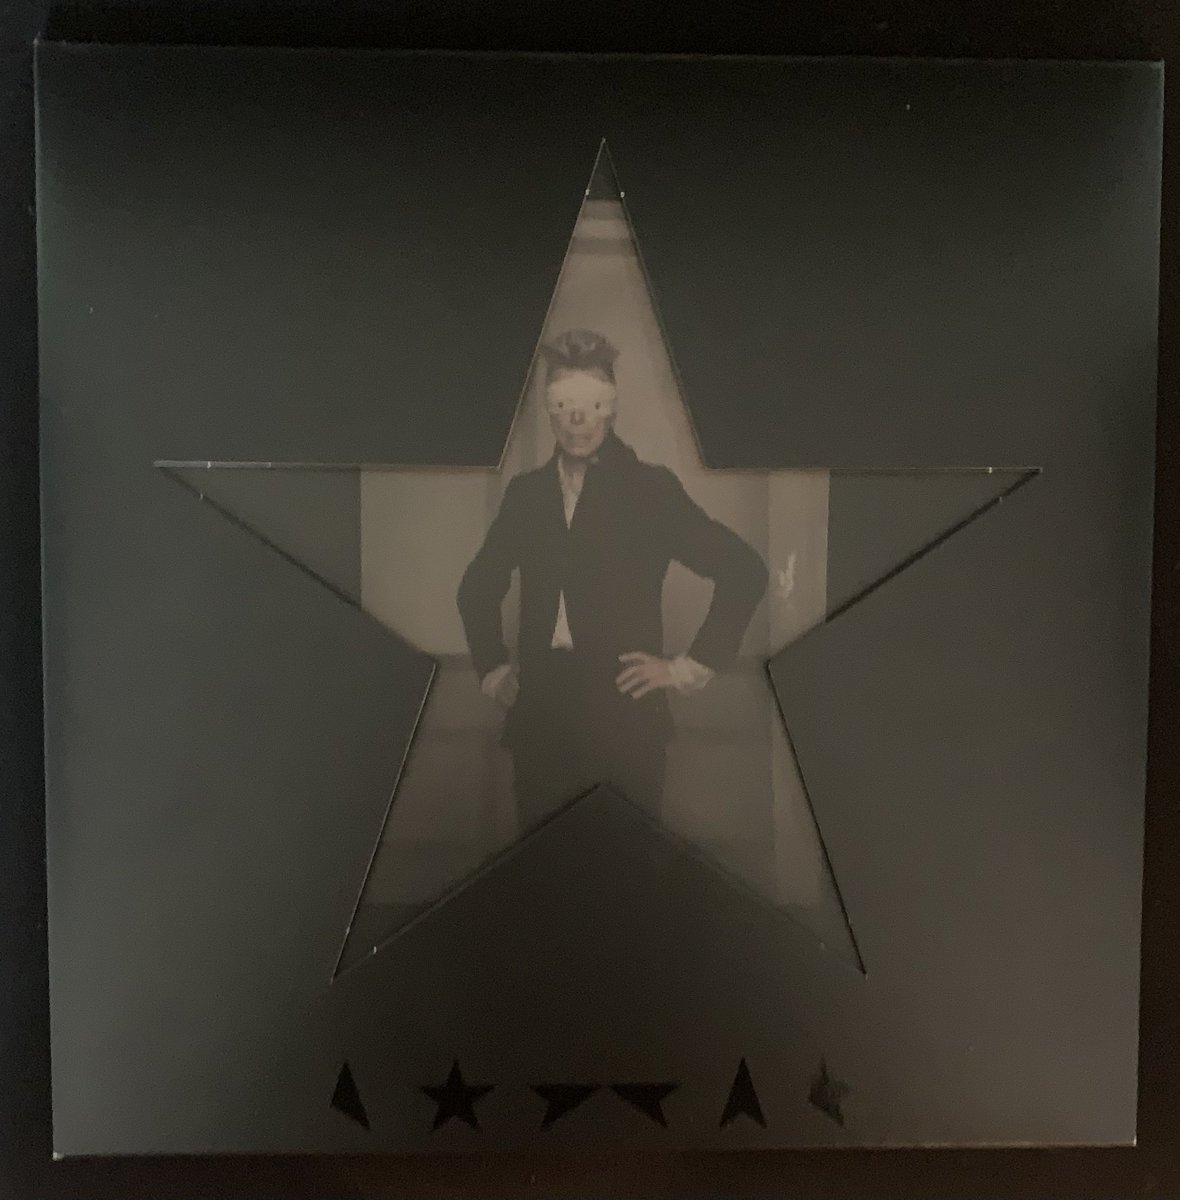 #5albums21cFinal
#NowPIaying 
David Bowie - Blackstar. From 2016.